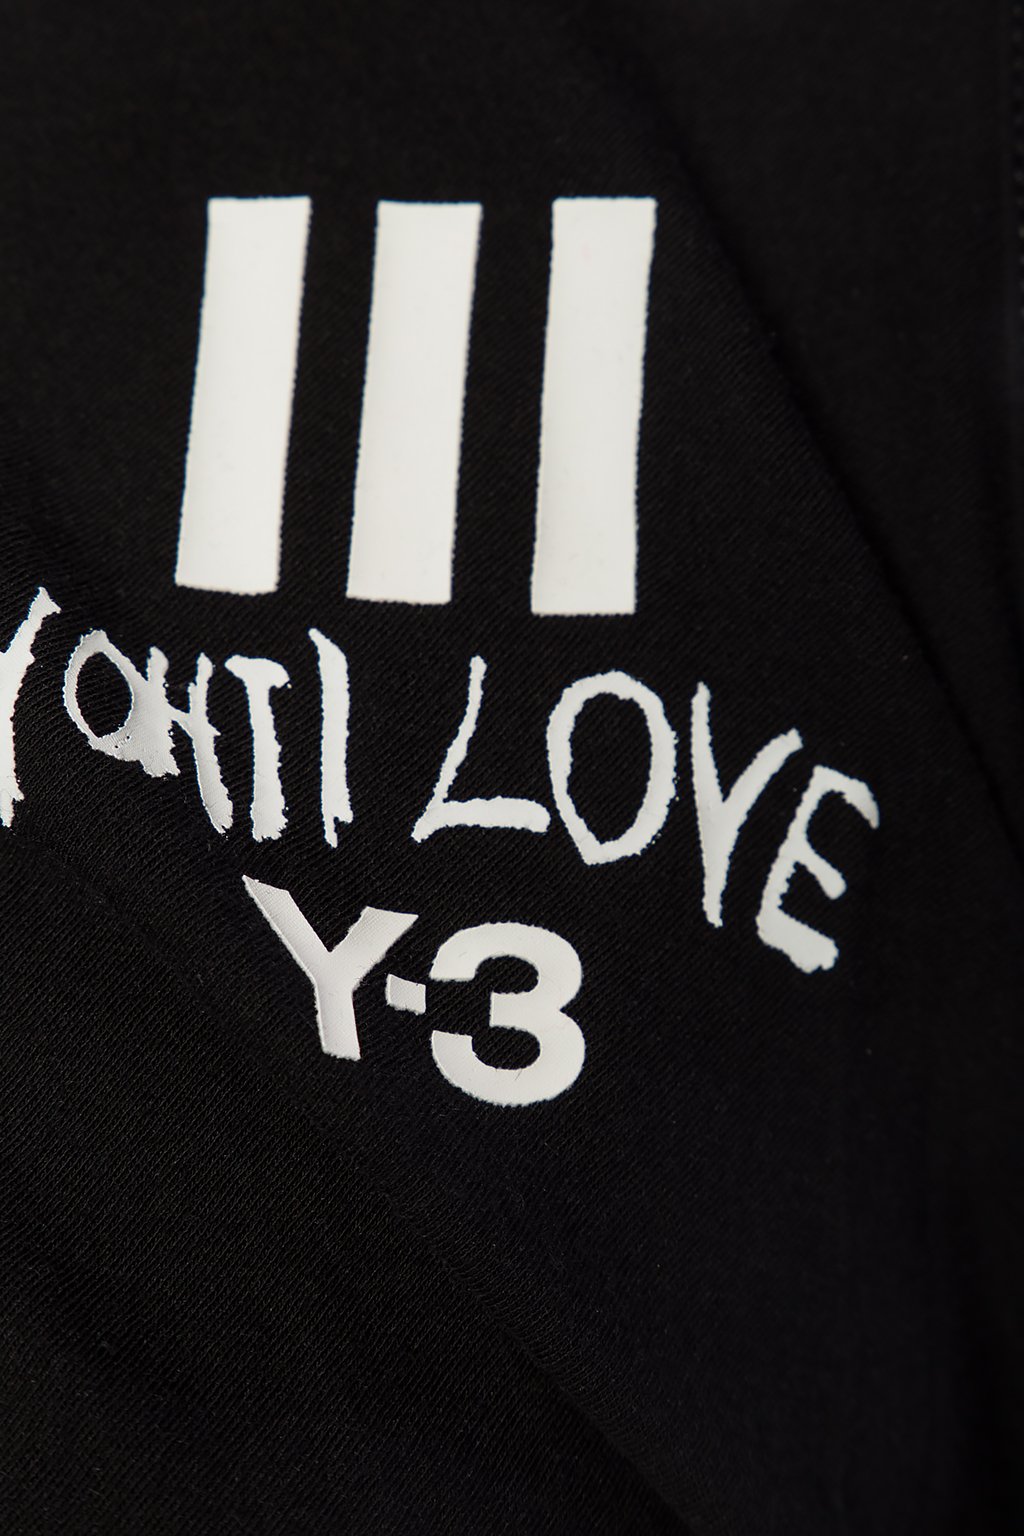 y3 brand